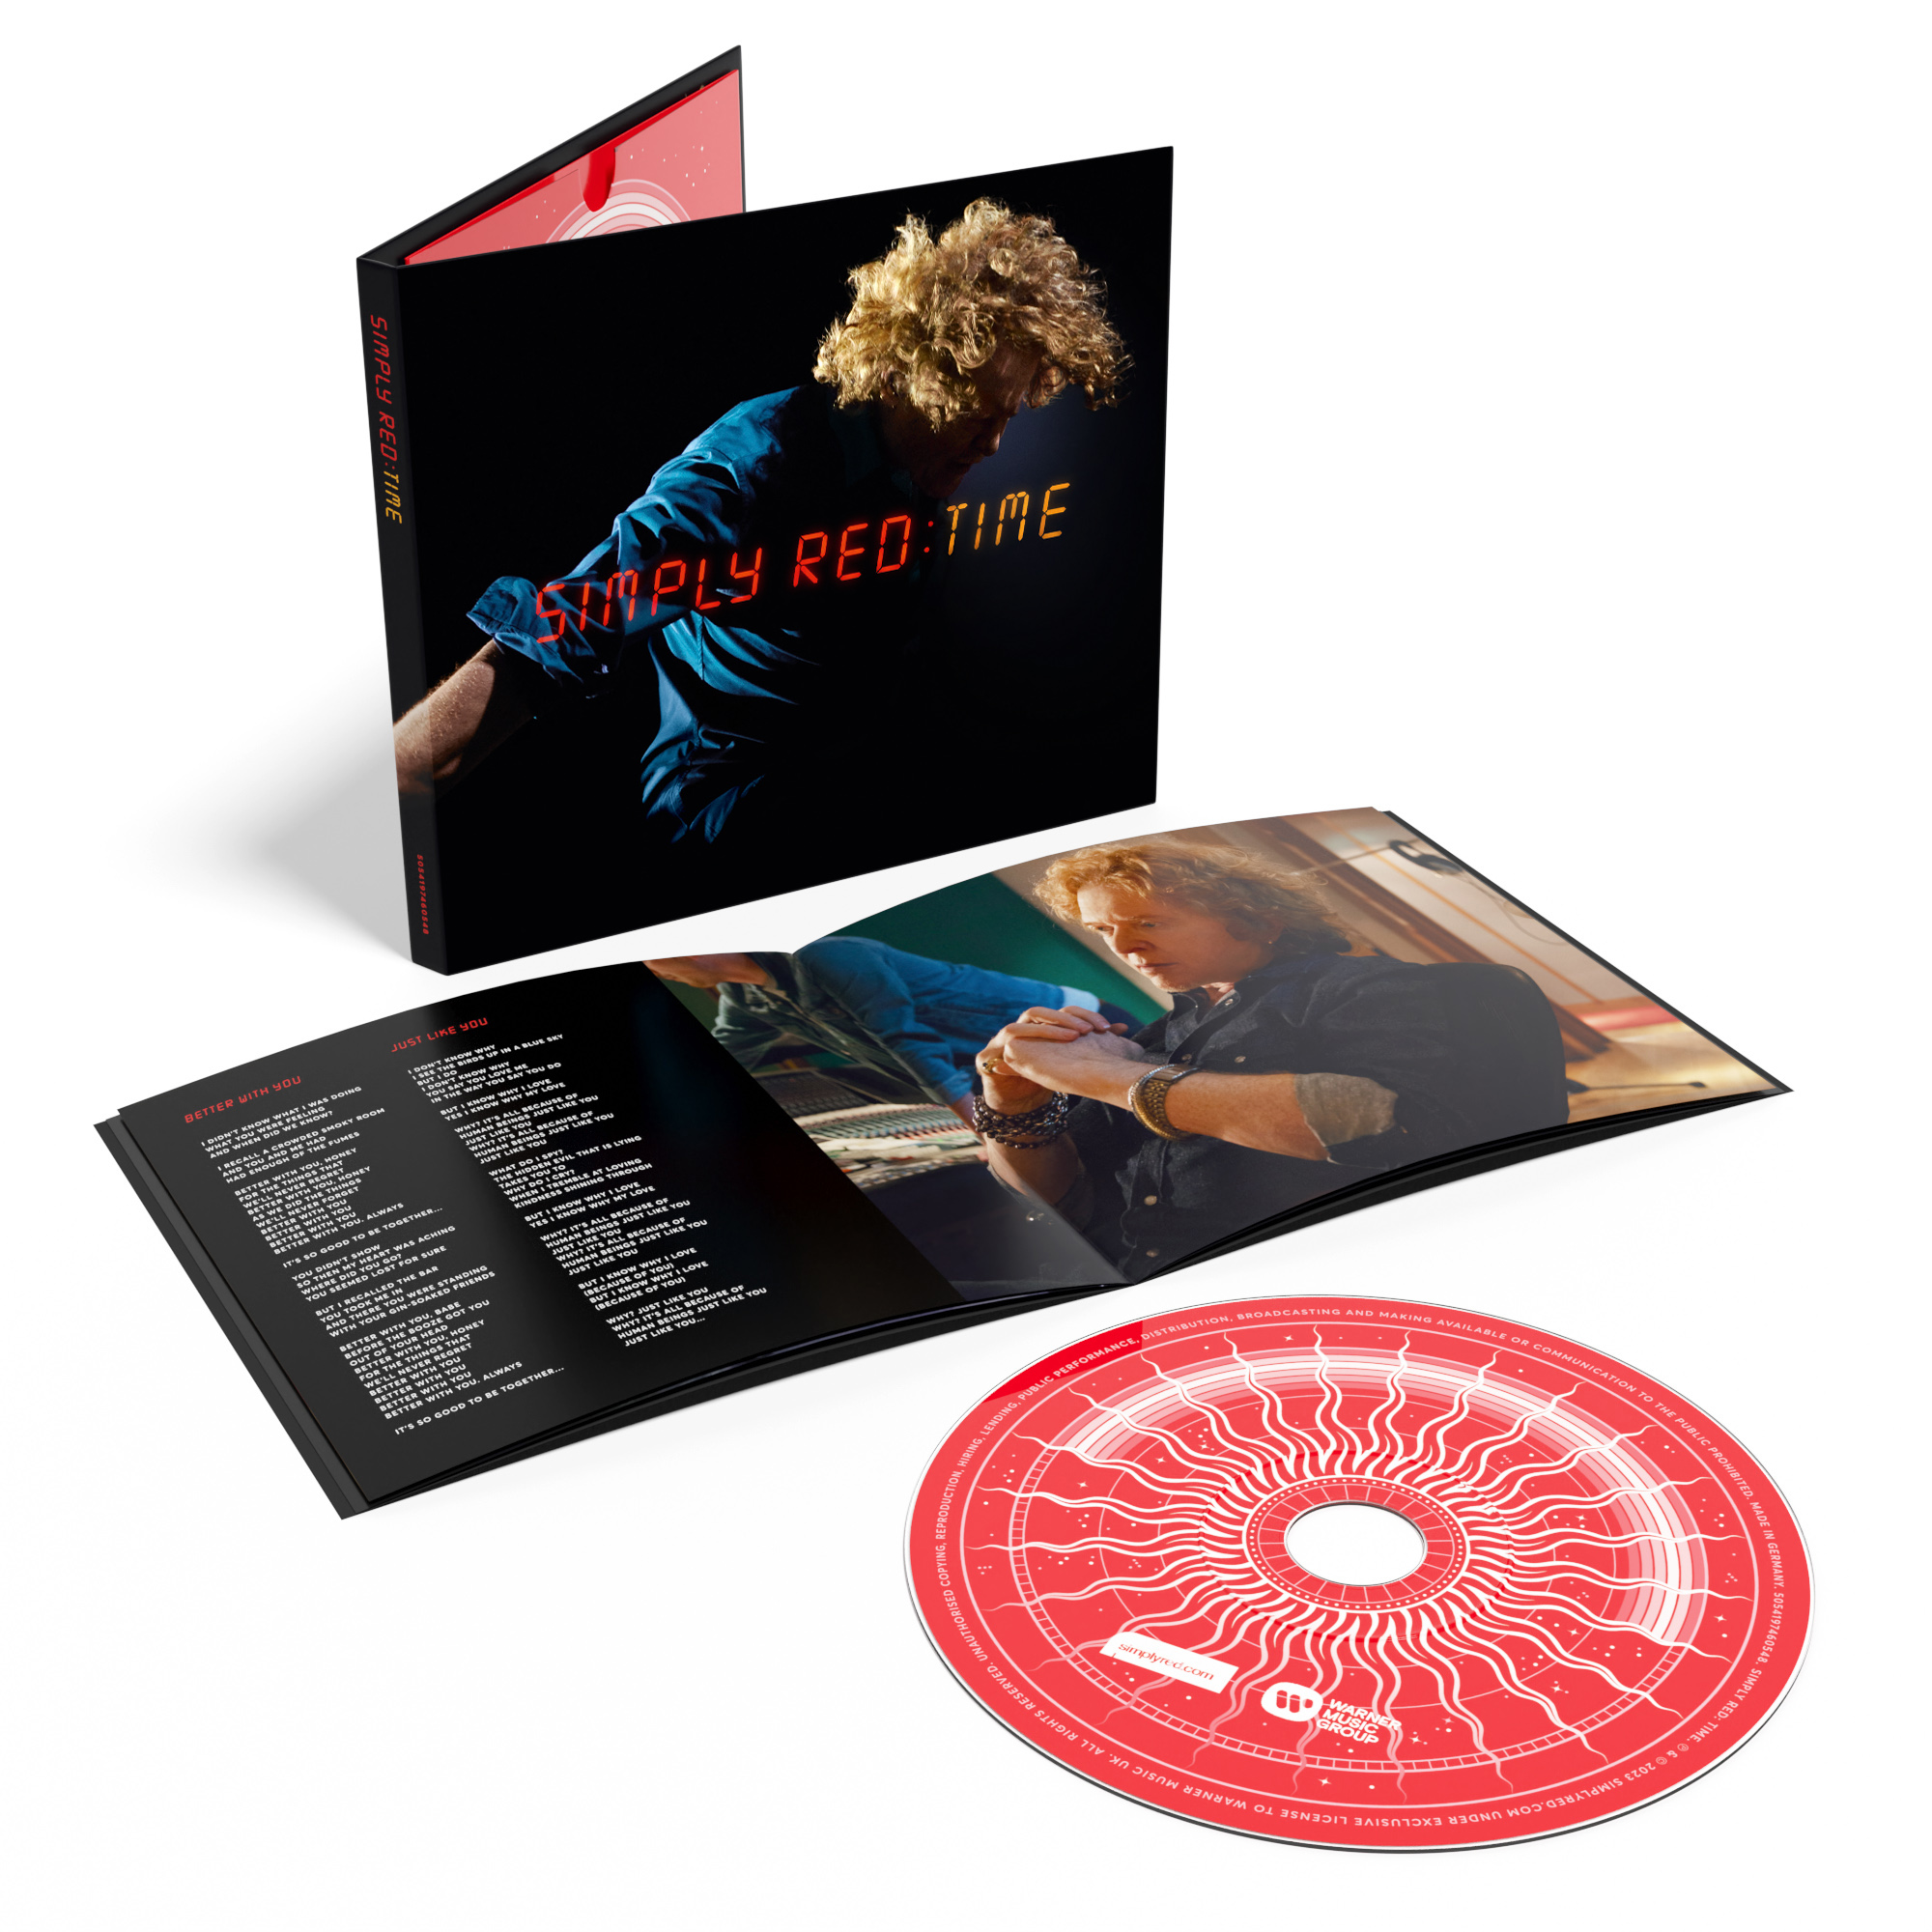 Simply Red - TIME (CD) 